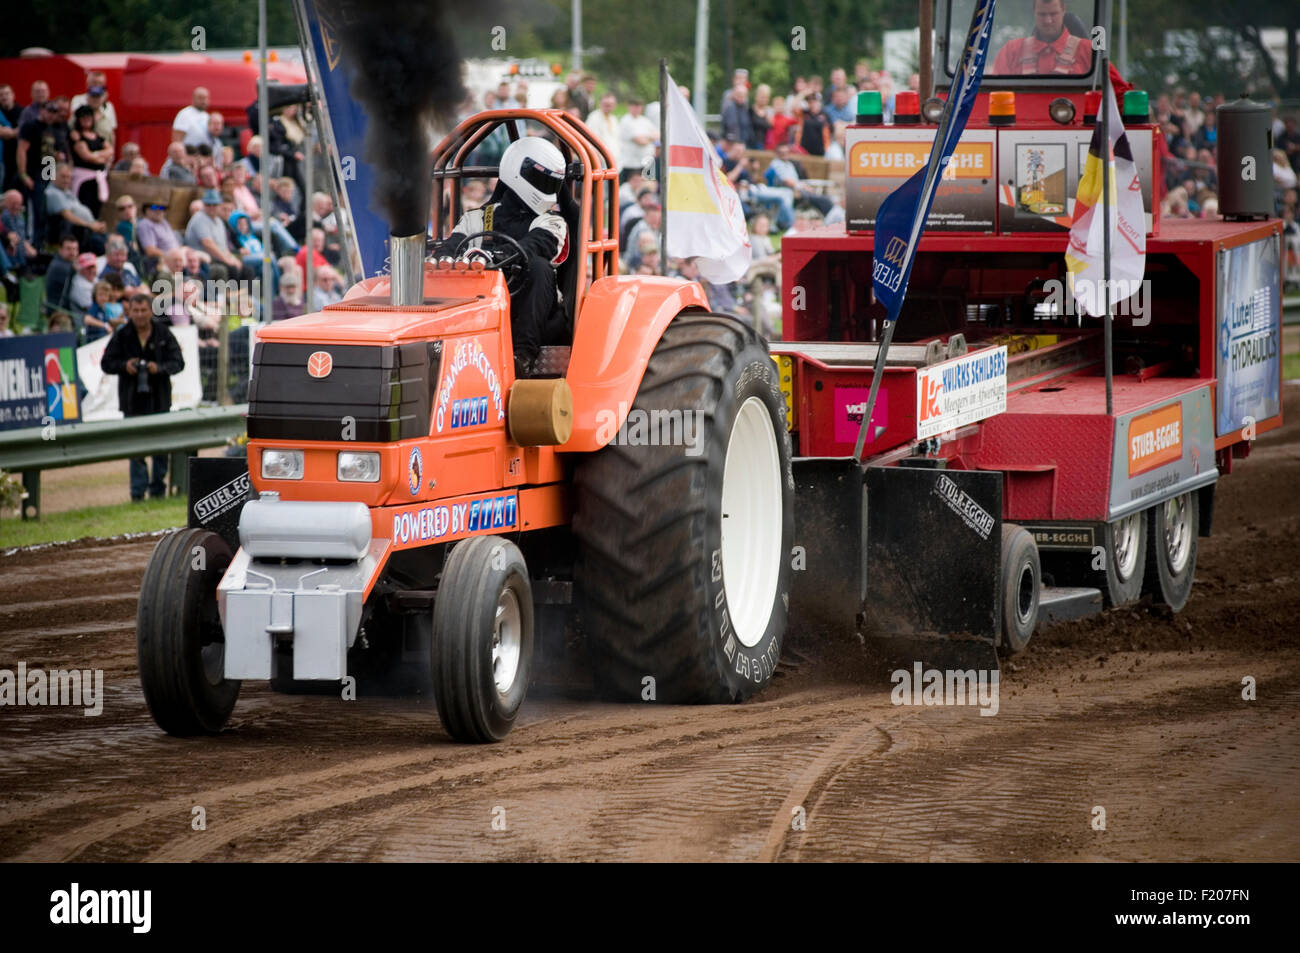 tractor pull pulling puller pullers diesel smoke thick black smokey particulate particles Stock Photo